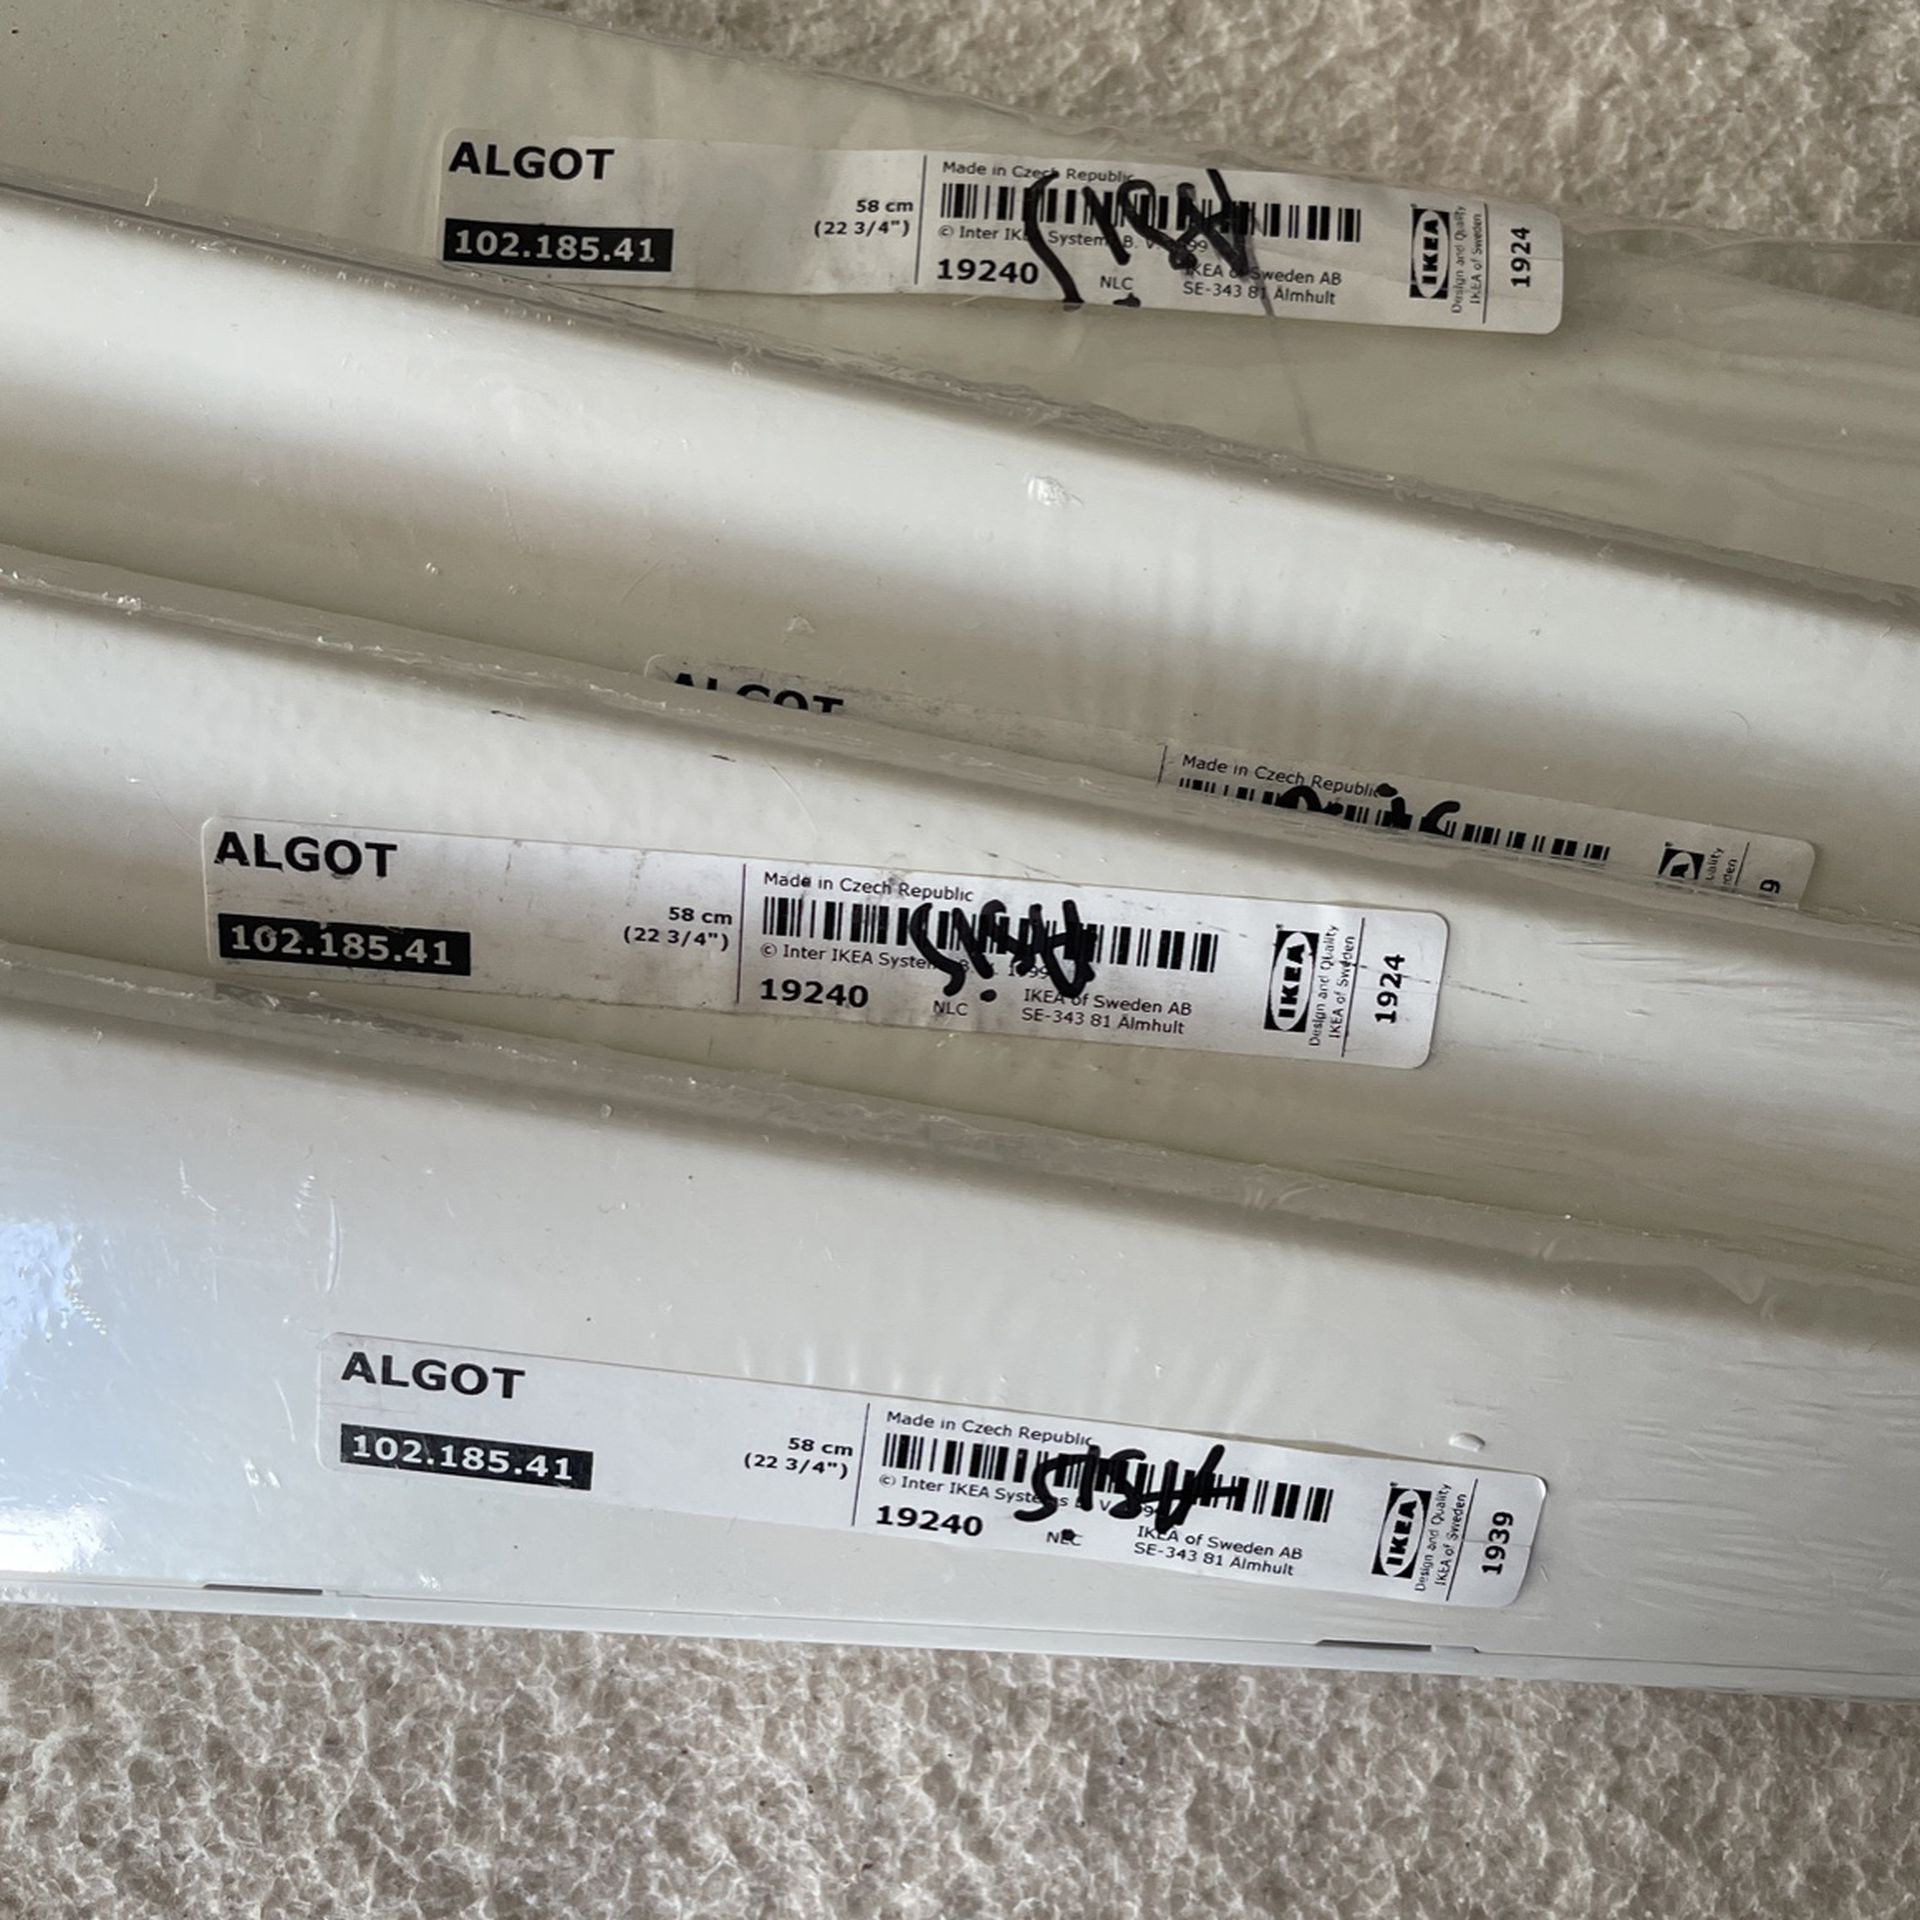  (IF IT’S LISTED, IT’S AVAILABLE.) $35 IKEA Algot Closet System Brackets ( 22 In.)